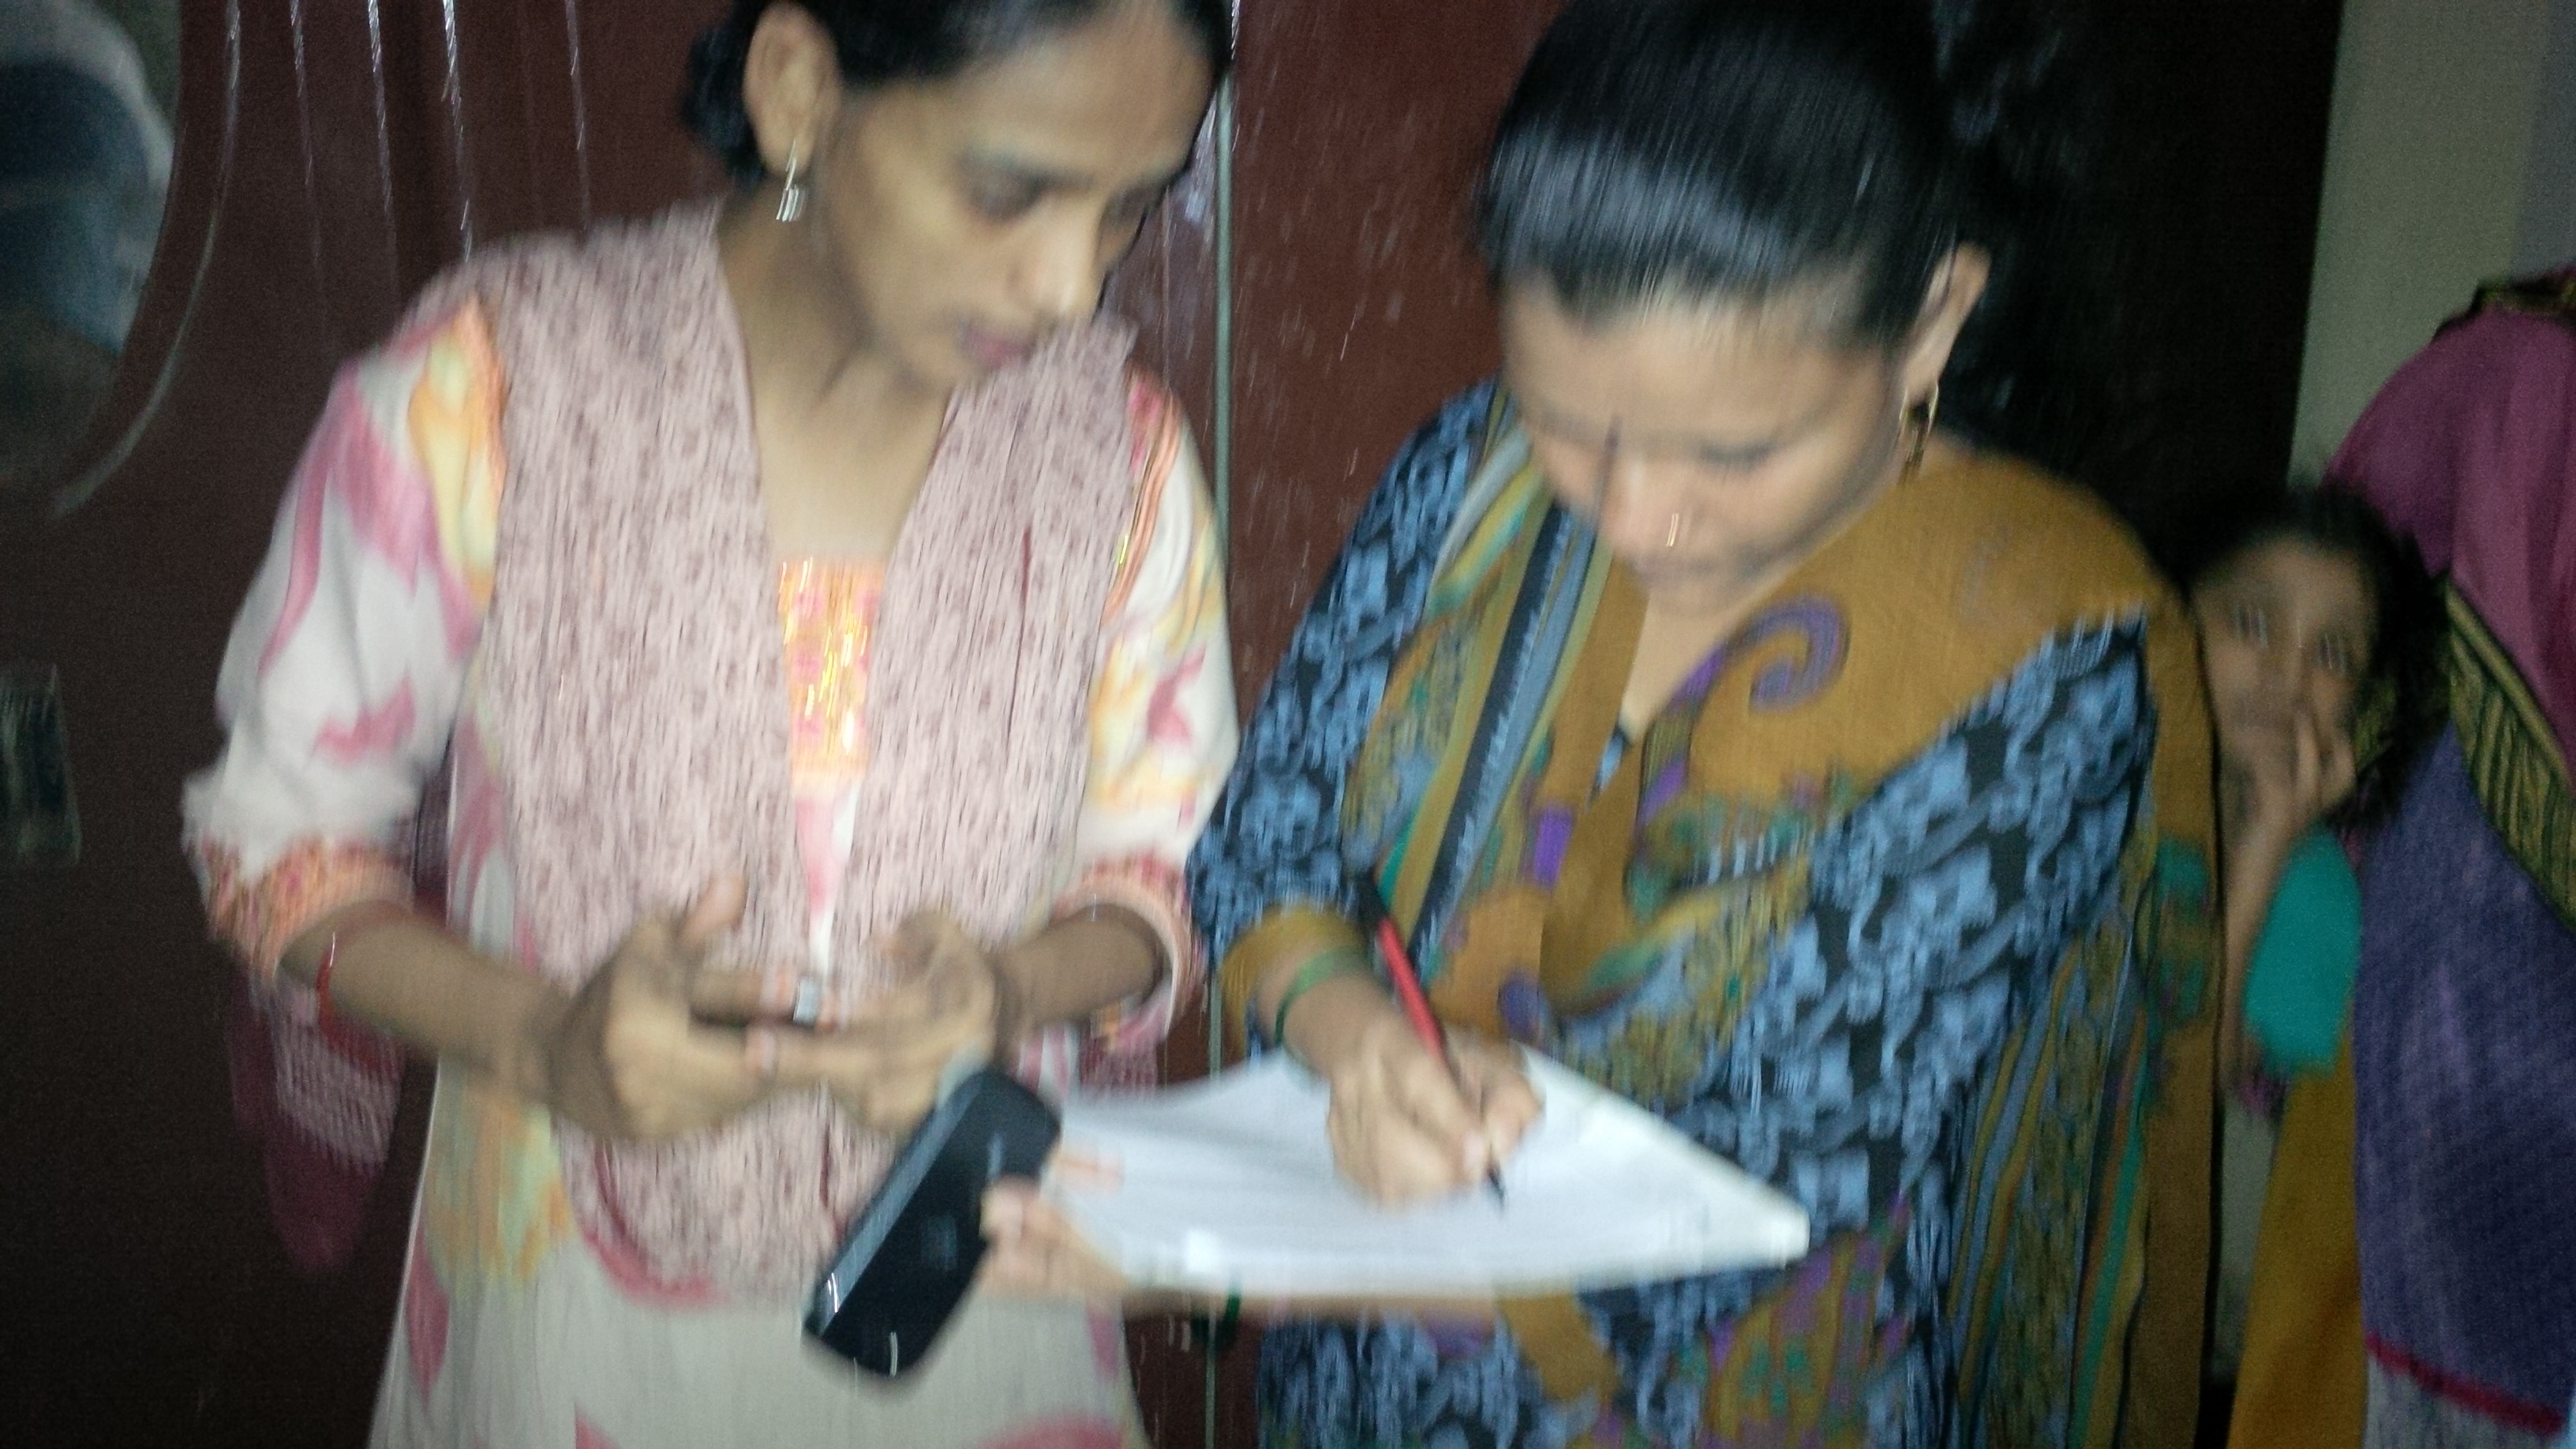 A community health worker registers a pregnant woman for the mMitra service, a partnership between MAMA and ARMMAN